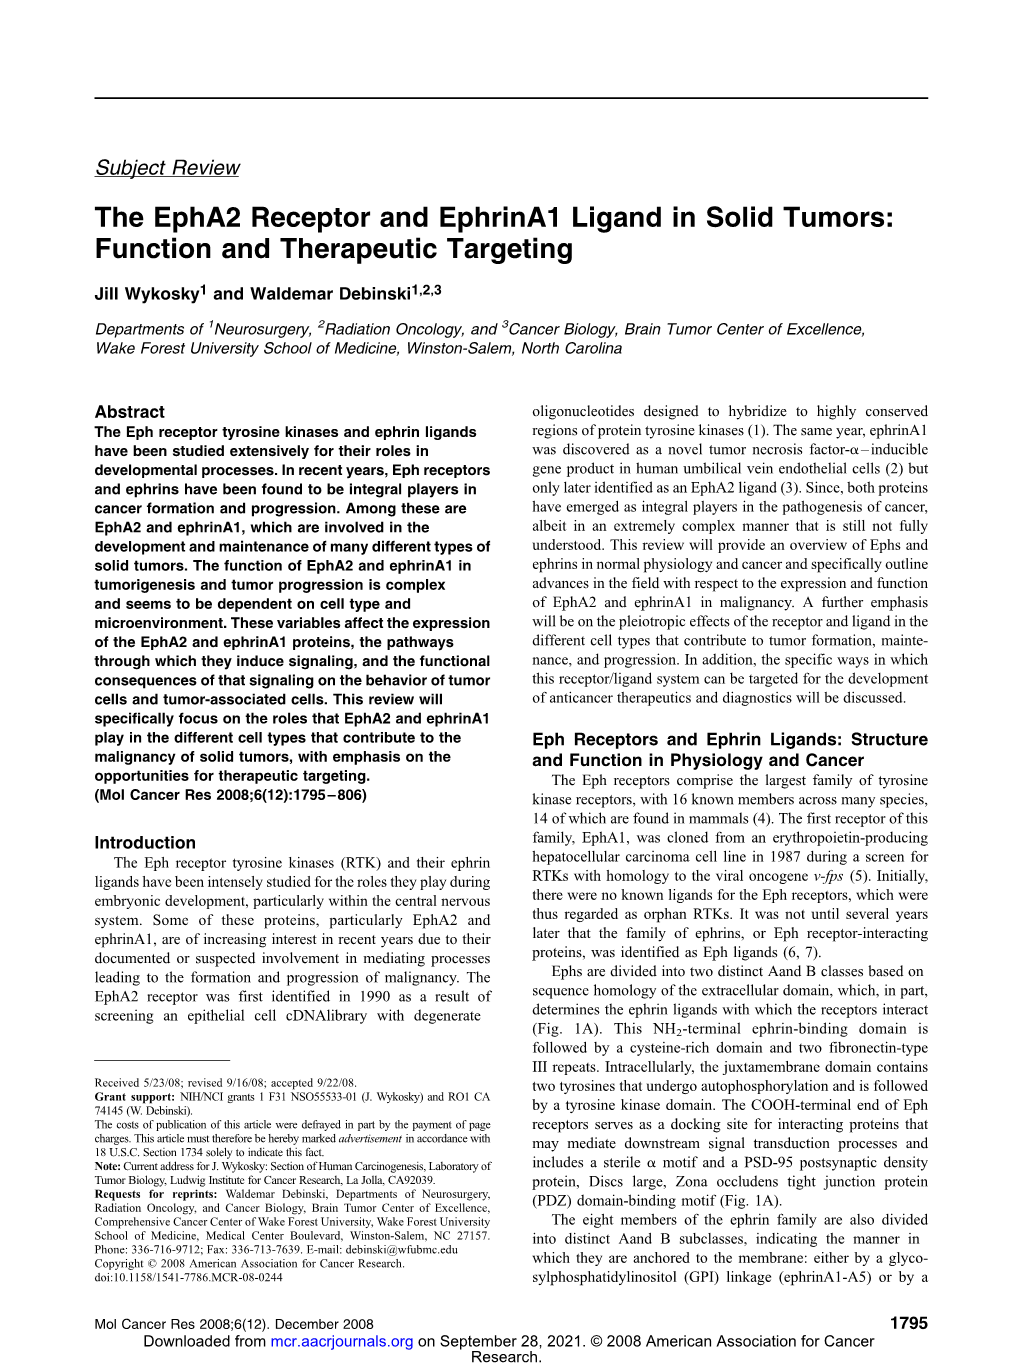 The Epha2 Receptor and Ephrina1 Ligand in Solid Tumors: Function and Therapeutic Targeting